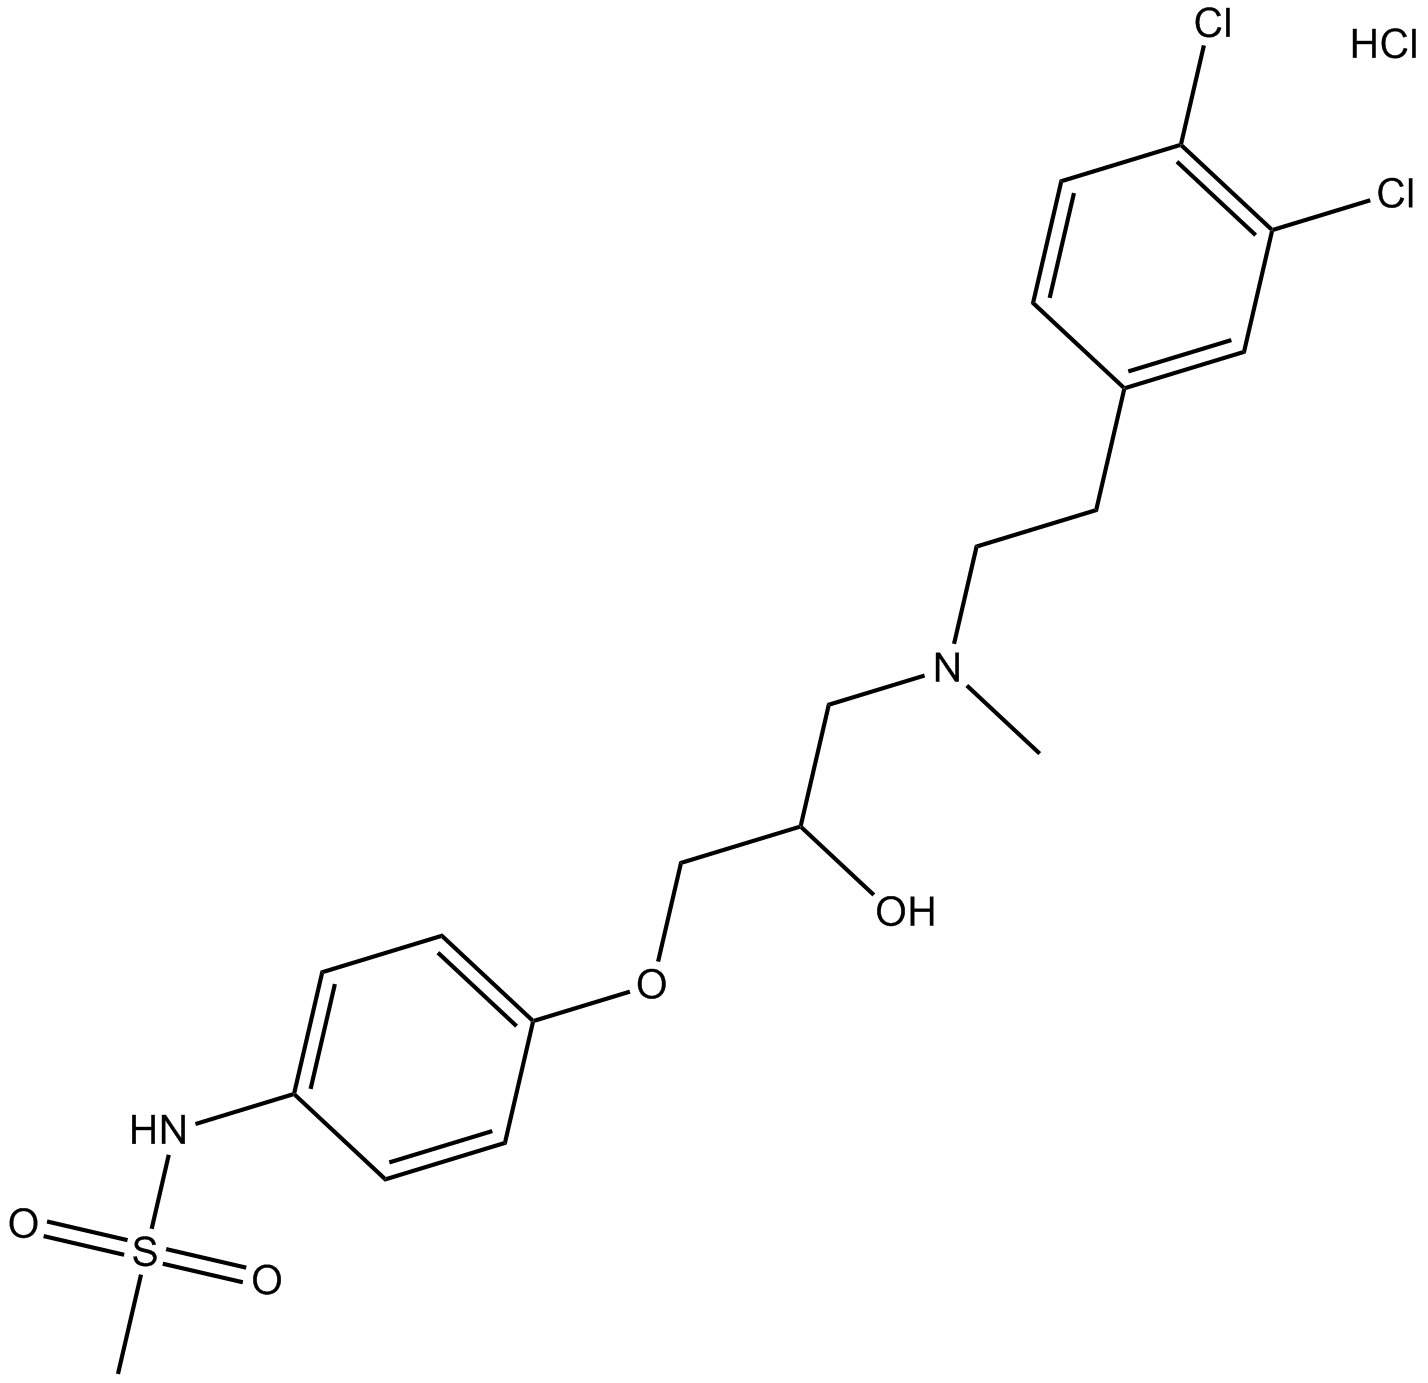 AM 92016 hydrochloride  Chemical Structure